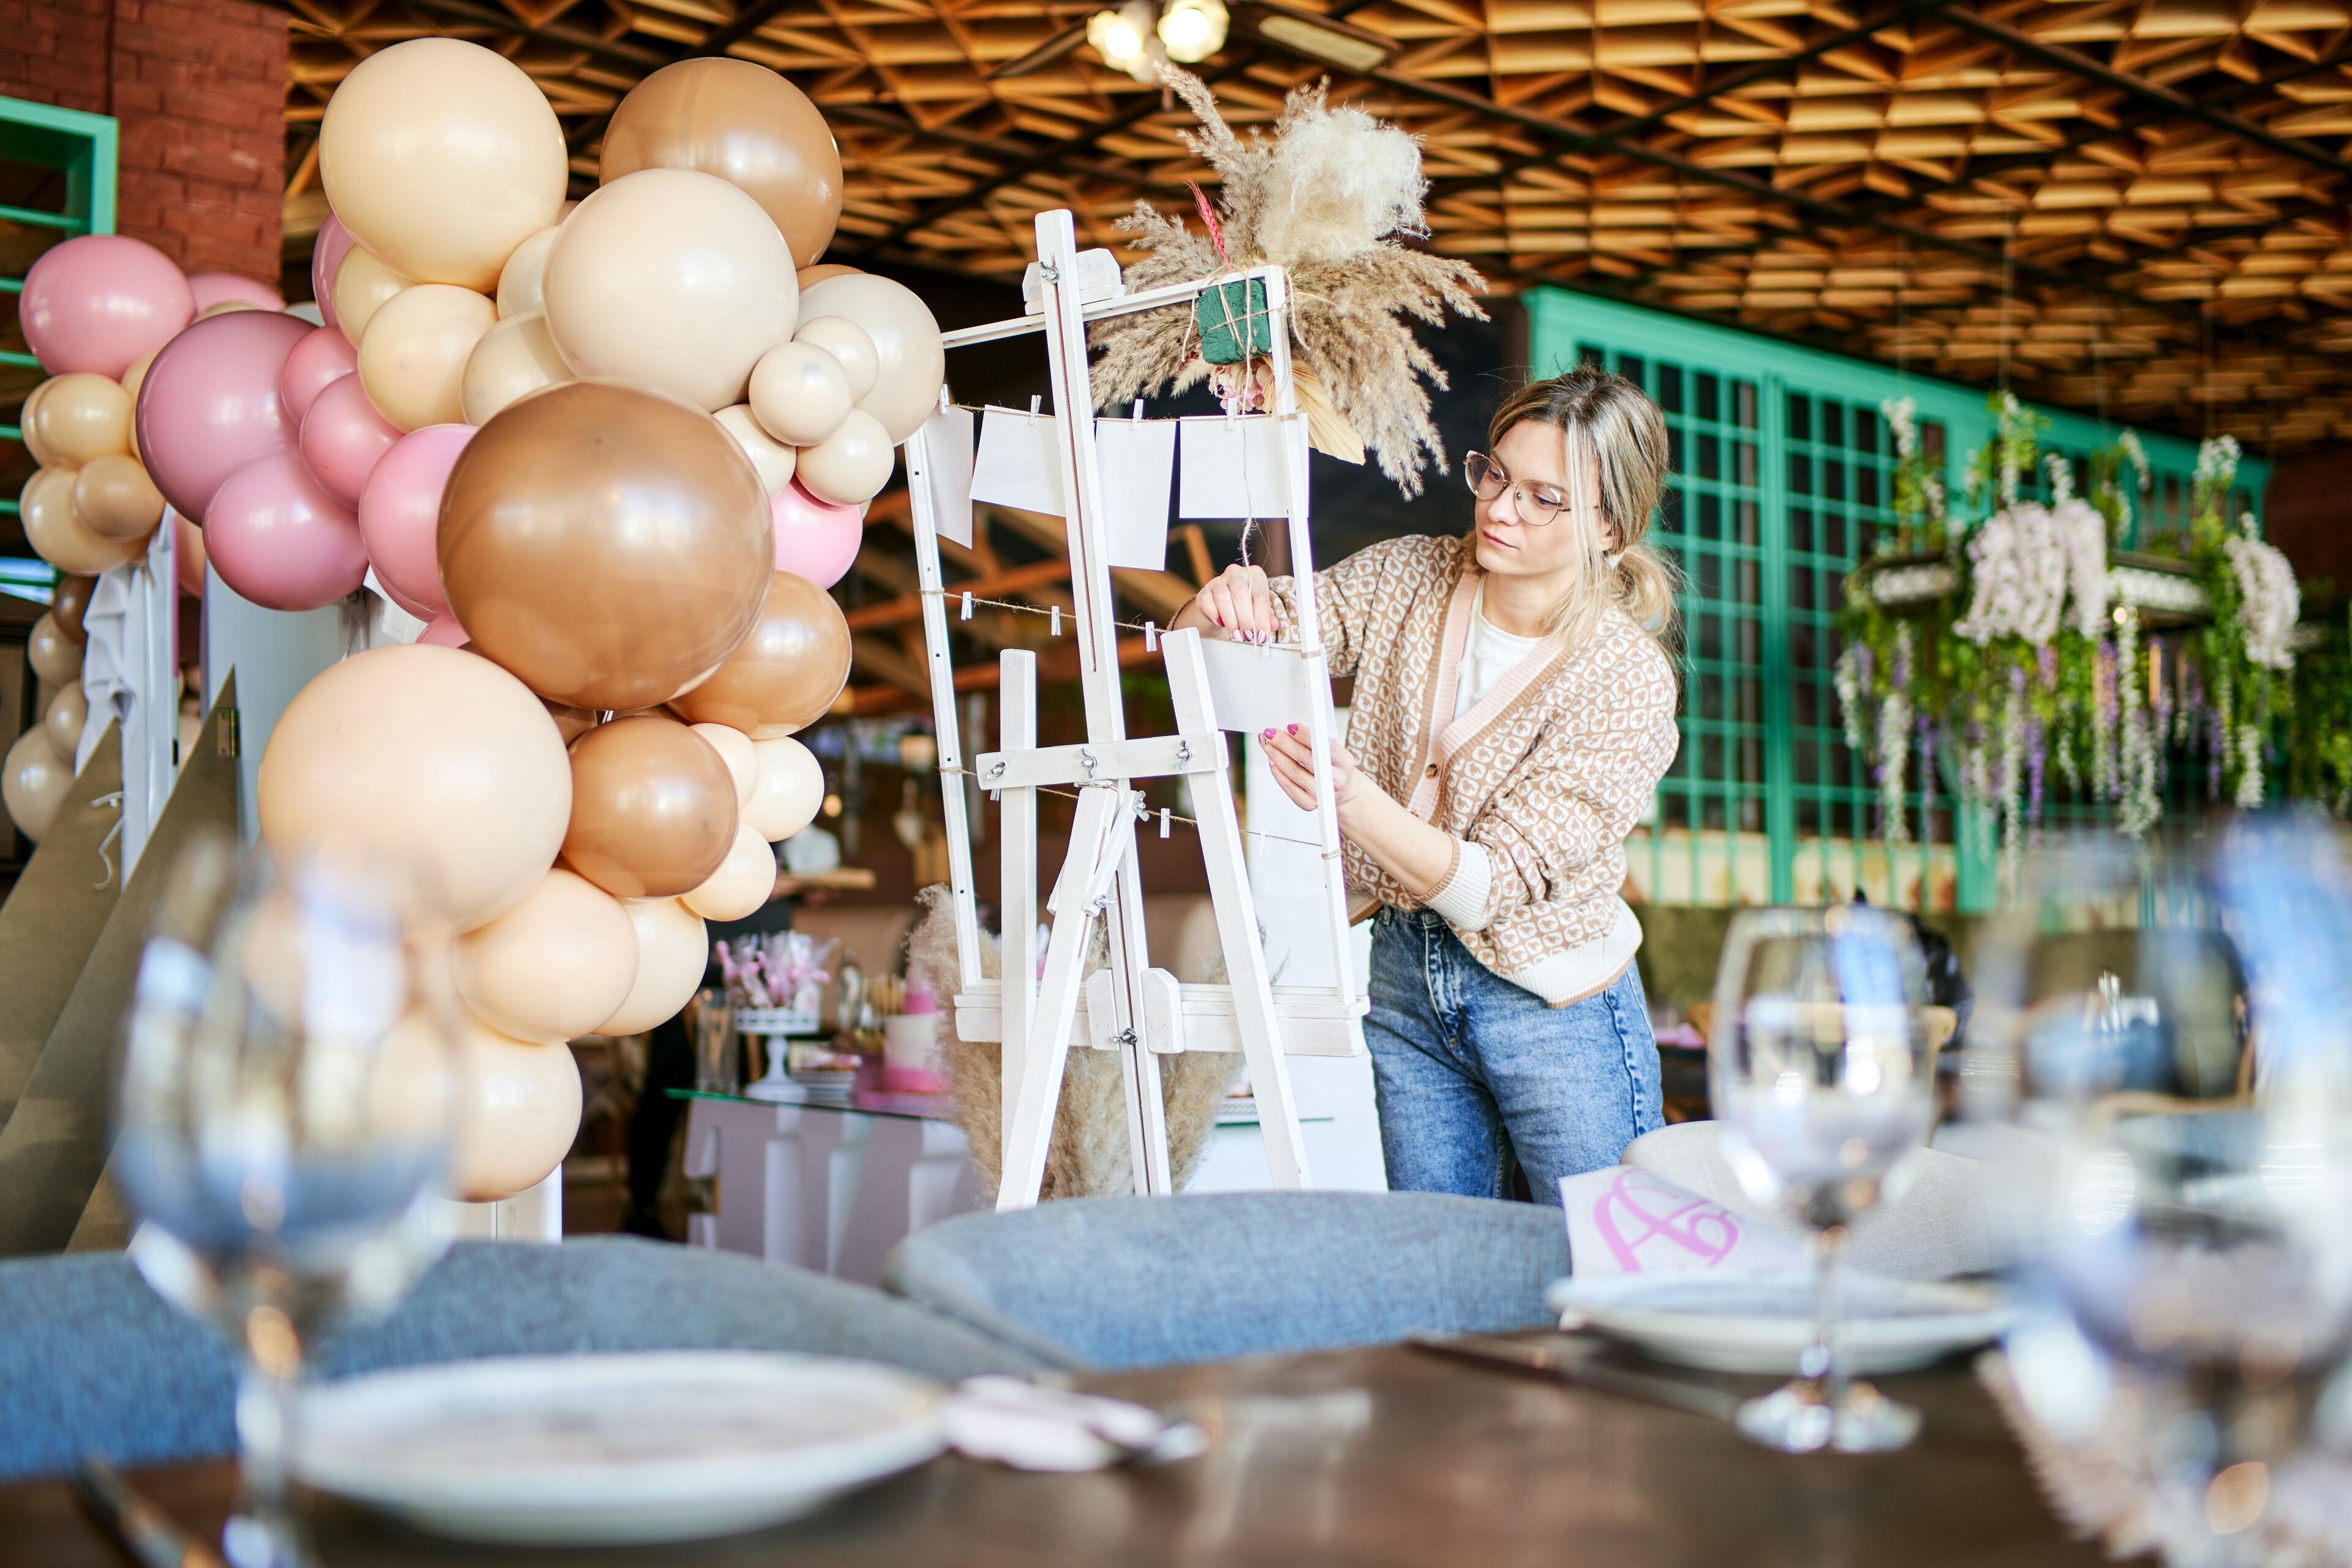 ImageA focused event planner adjusts decorations on a white easel amid a festive setting with balloons and elegant table settings.

